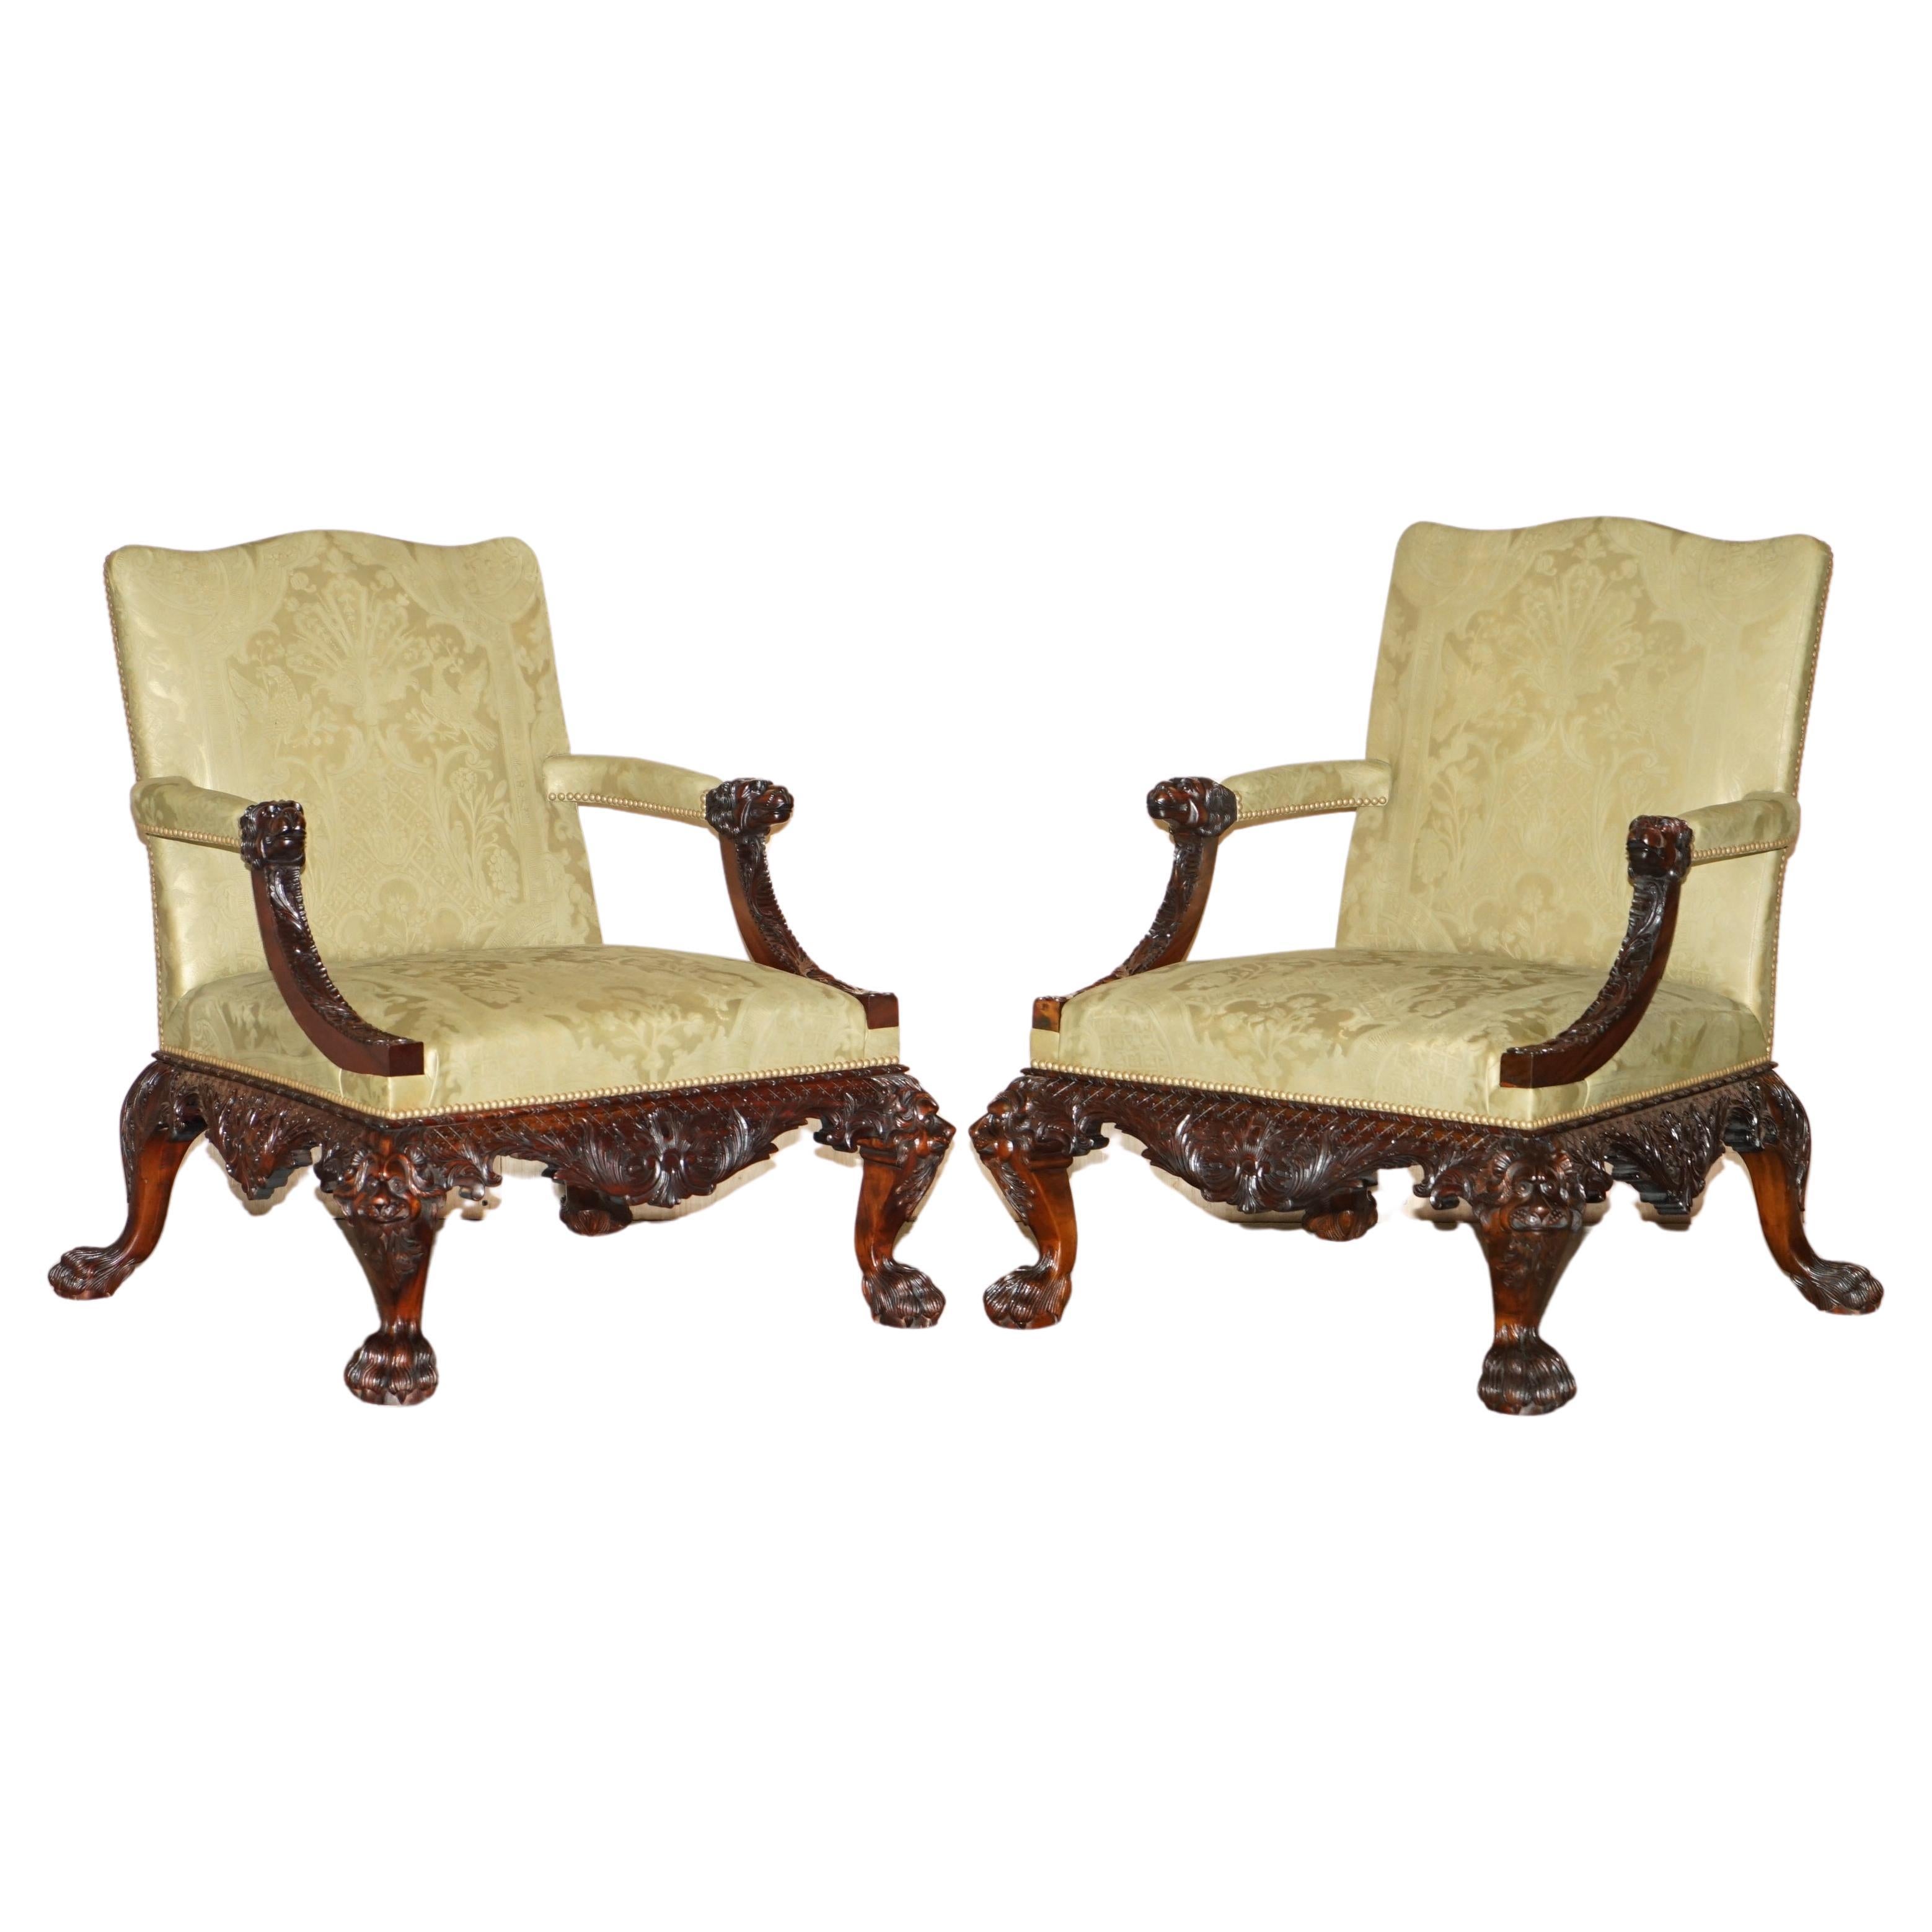 FINE PAiR OF LARGE CARVED GAINSBOROUGH ARMCHAIRS AFTER GILES GRENDEY 1693-1780 For Sale